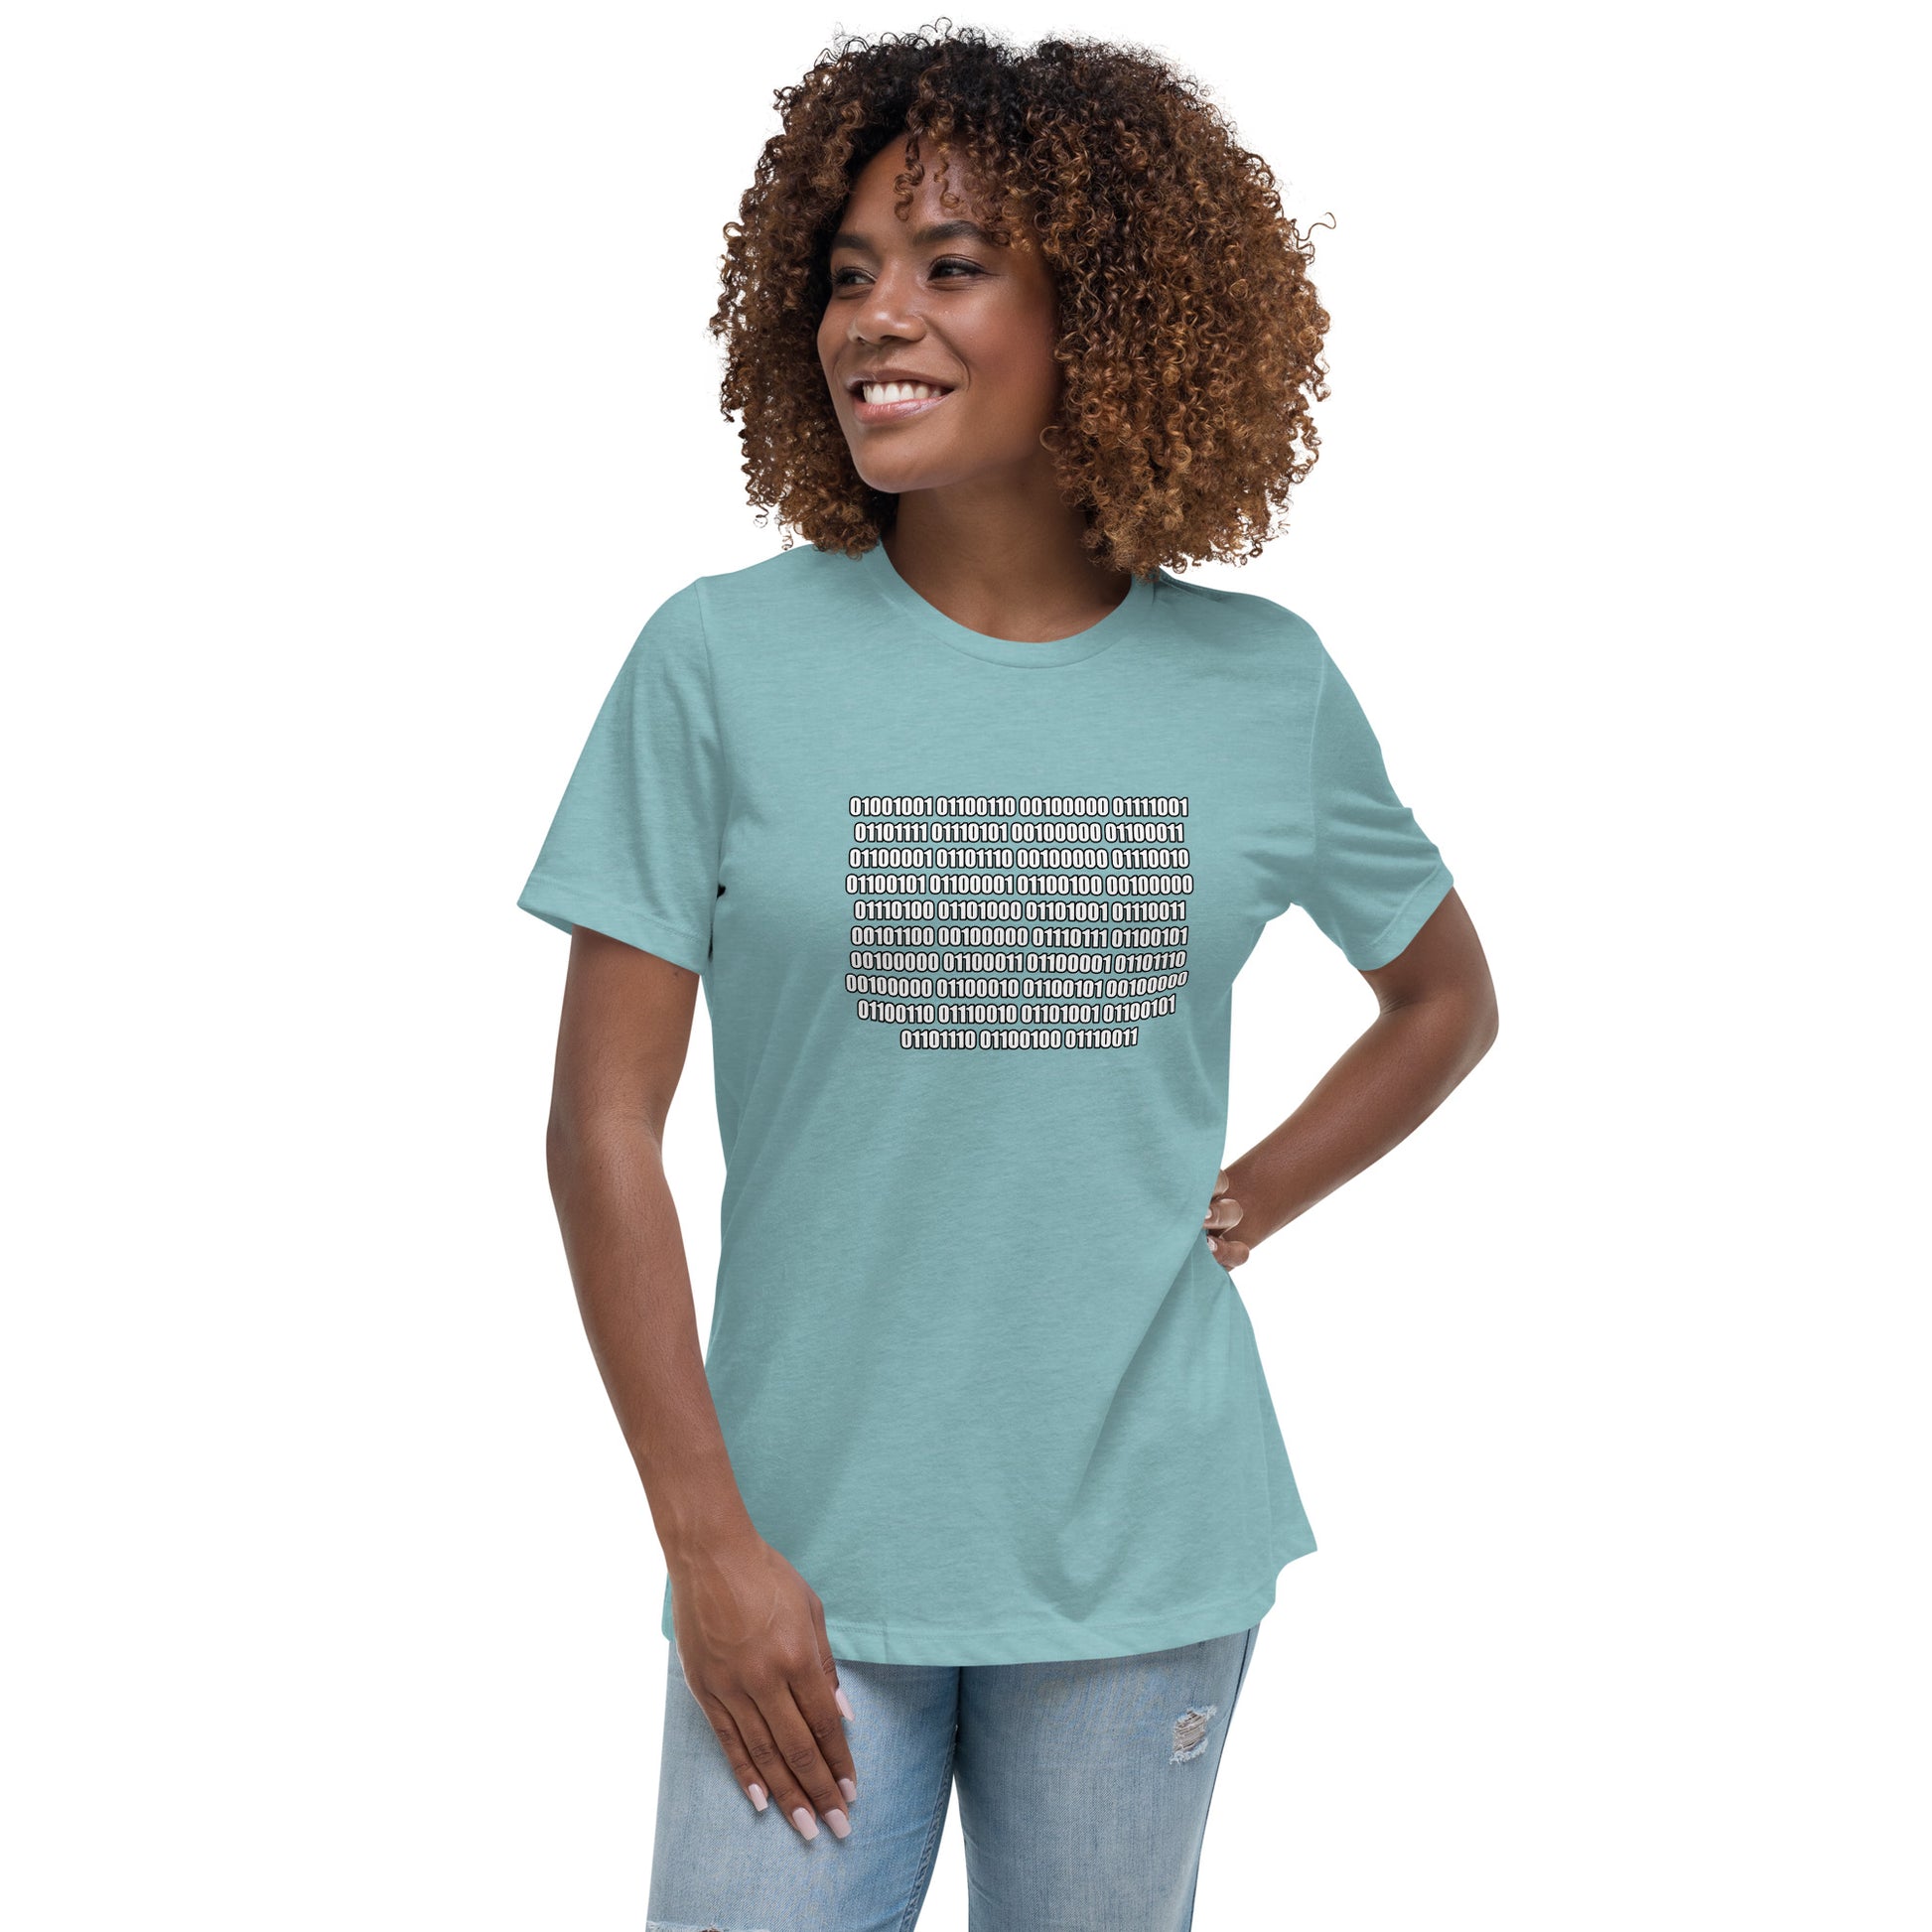 Woman with blue lagoon t-shirt with binary code "If you can read this"